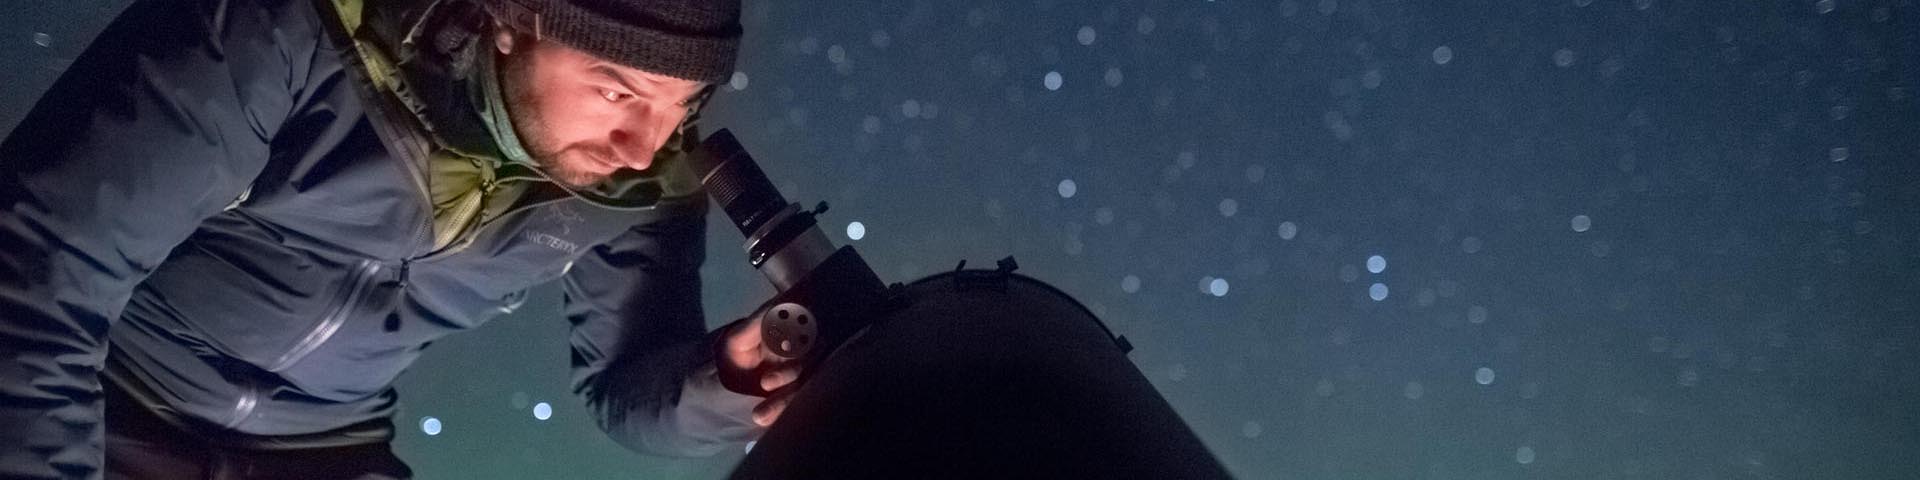 Visitor star gazing at night with an astronomy telescope taking in the brilliant stars and dancing aurora borealis in the Dark Sky Preserve